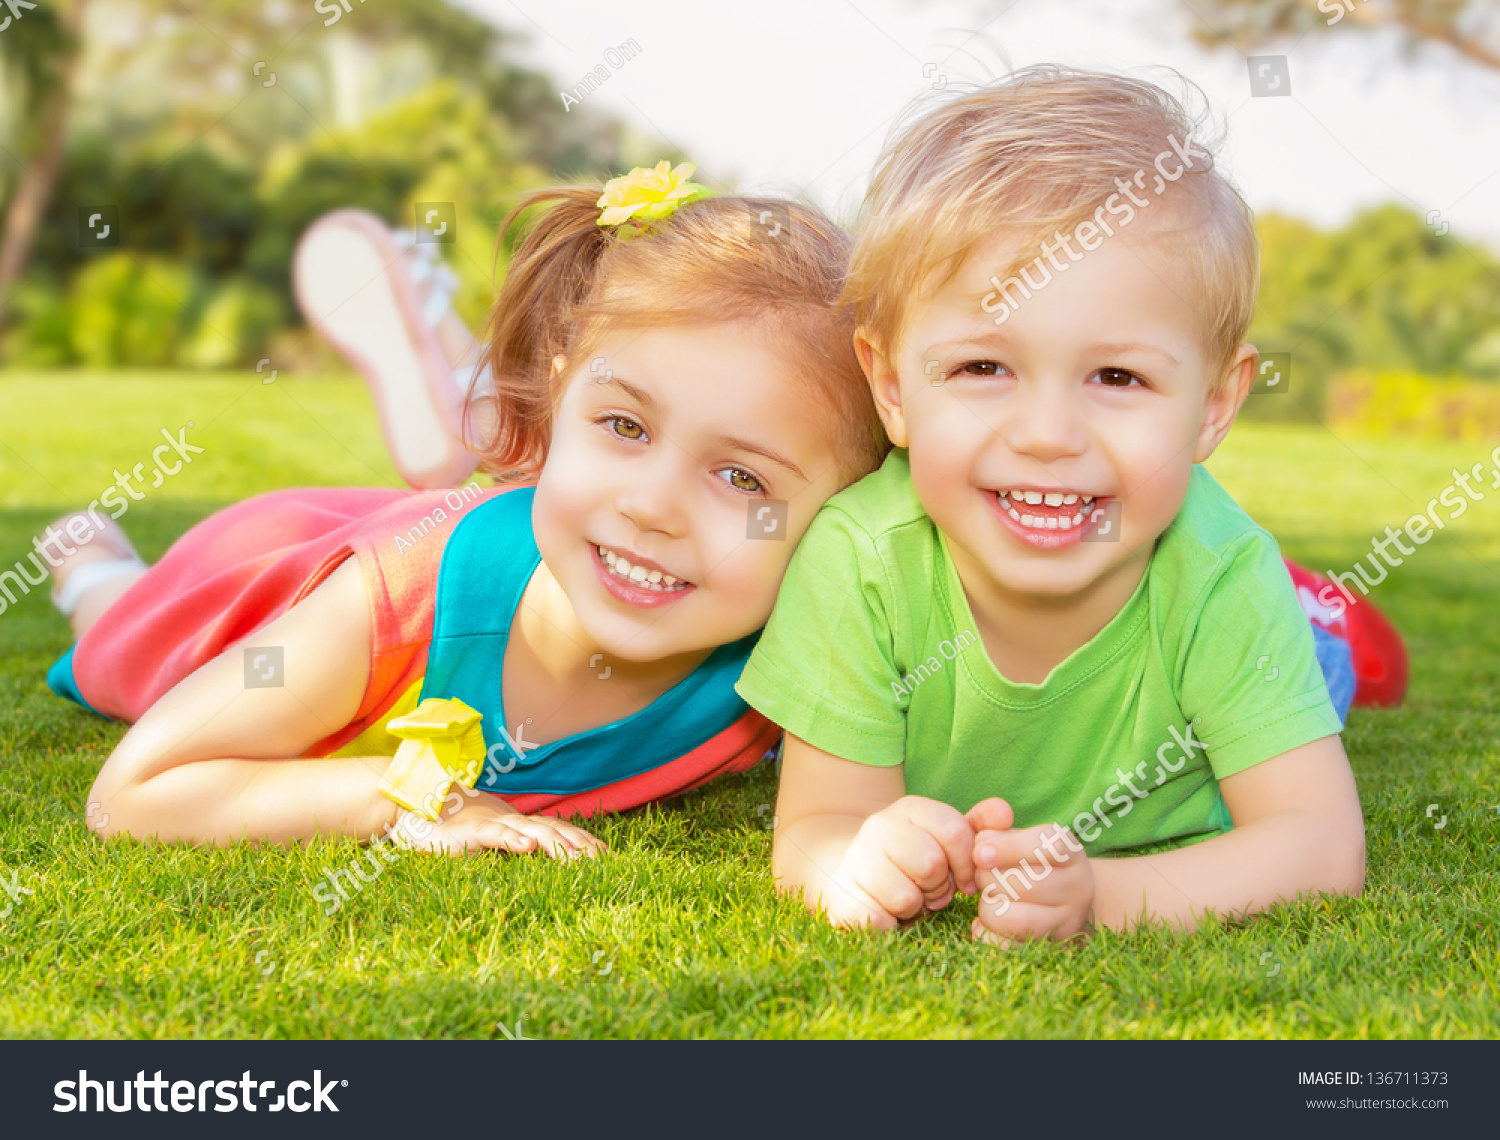 Picture of brother and sister having fun in the park, two cheerful children laying down on green grass, little girl and boy playing outdoors, best friends, happy family, love and happiness concept #136711373